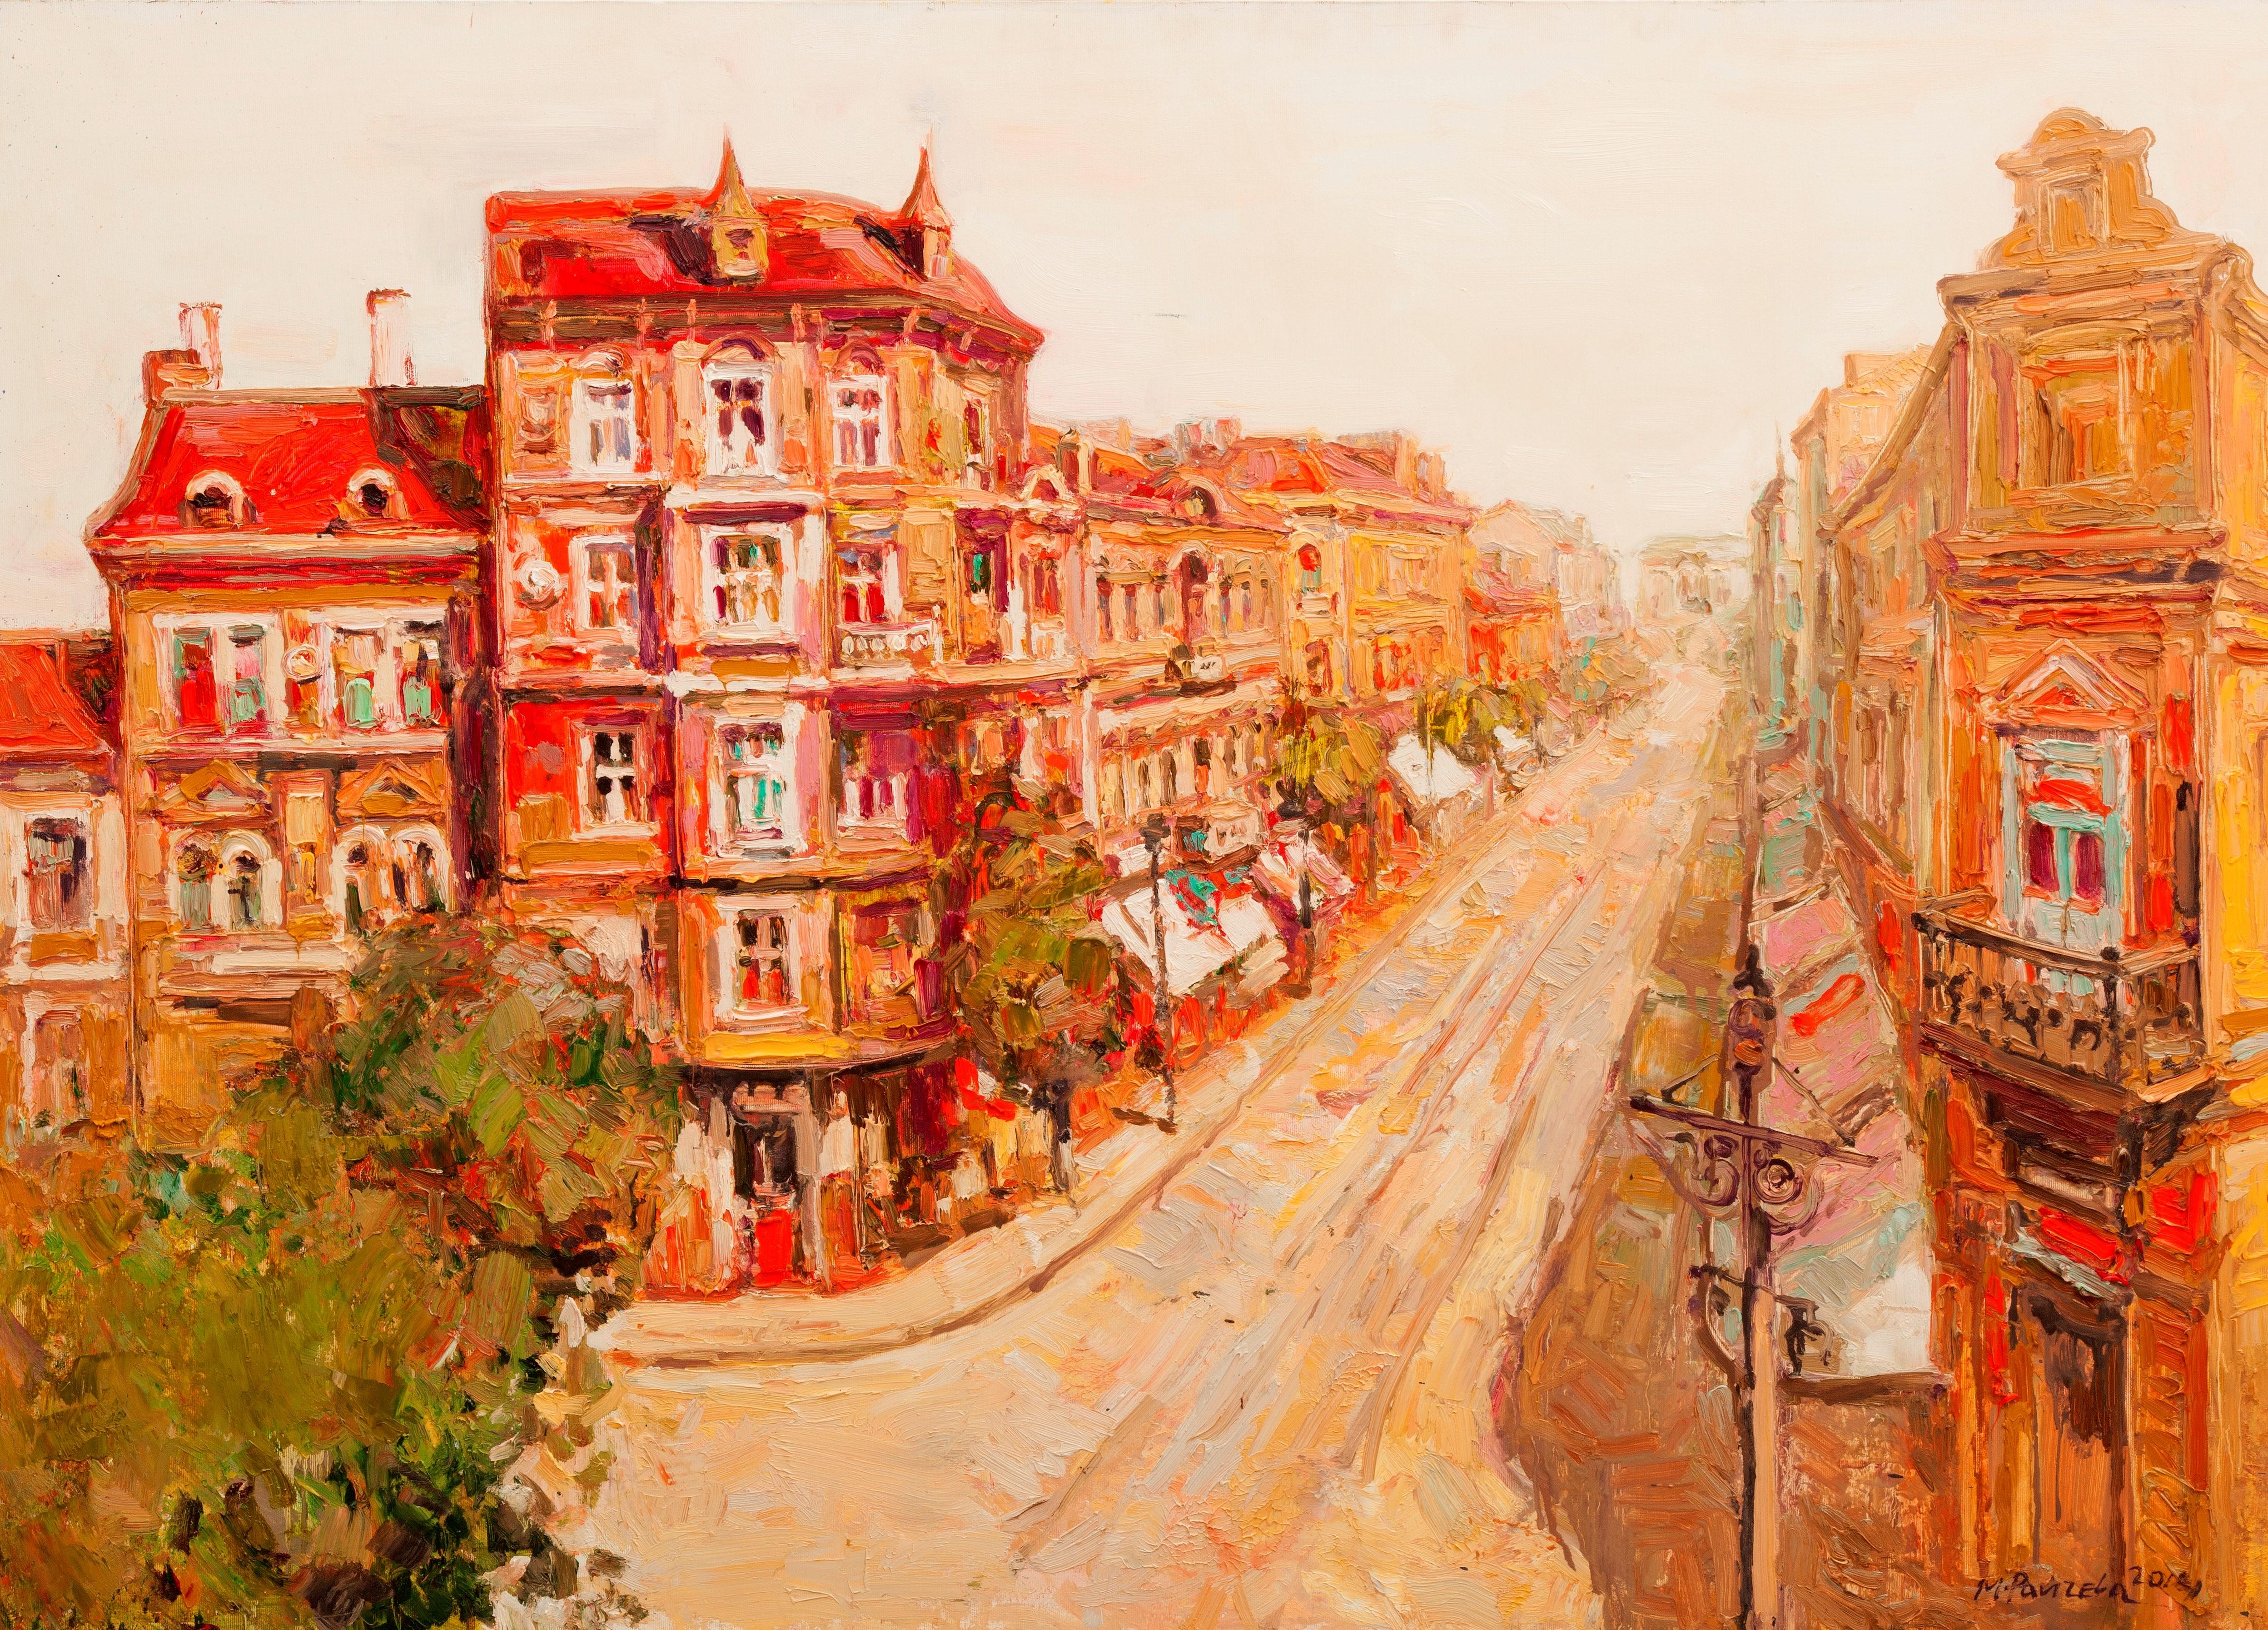 Maria Raycheva Landscape Painting – Sofia Boulevard - Landscape Oil Painting Colors Red Orange White Brown Pink